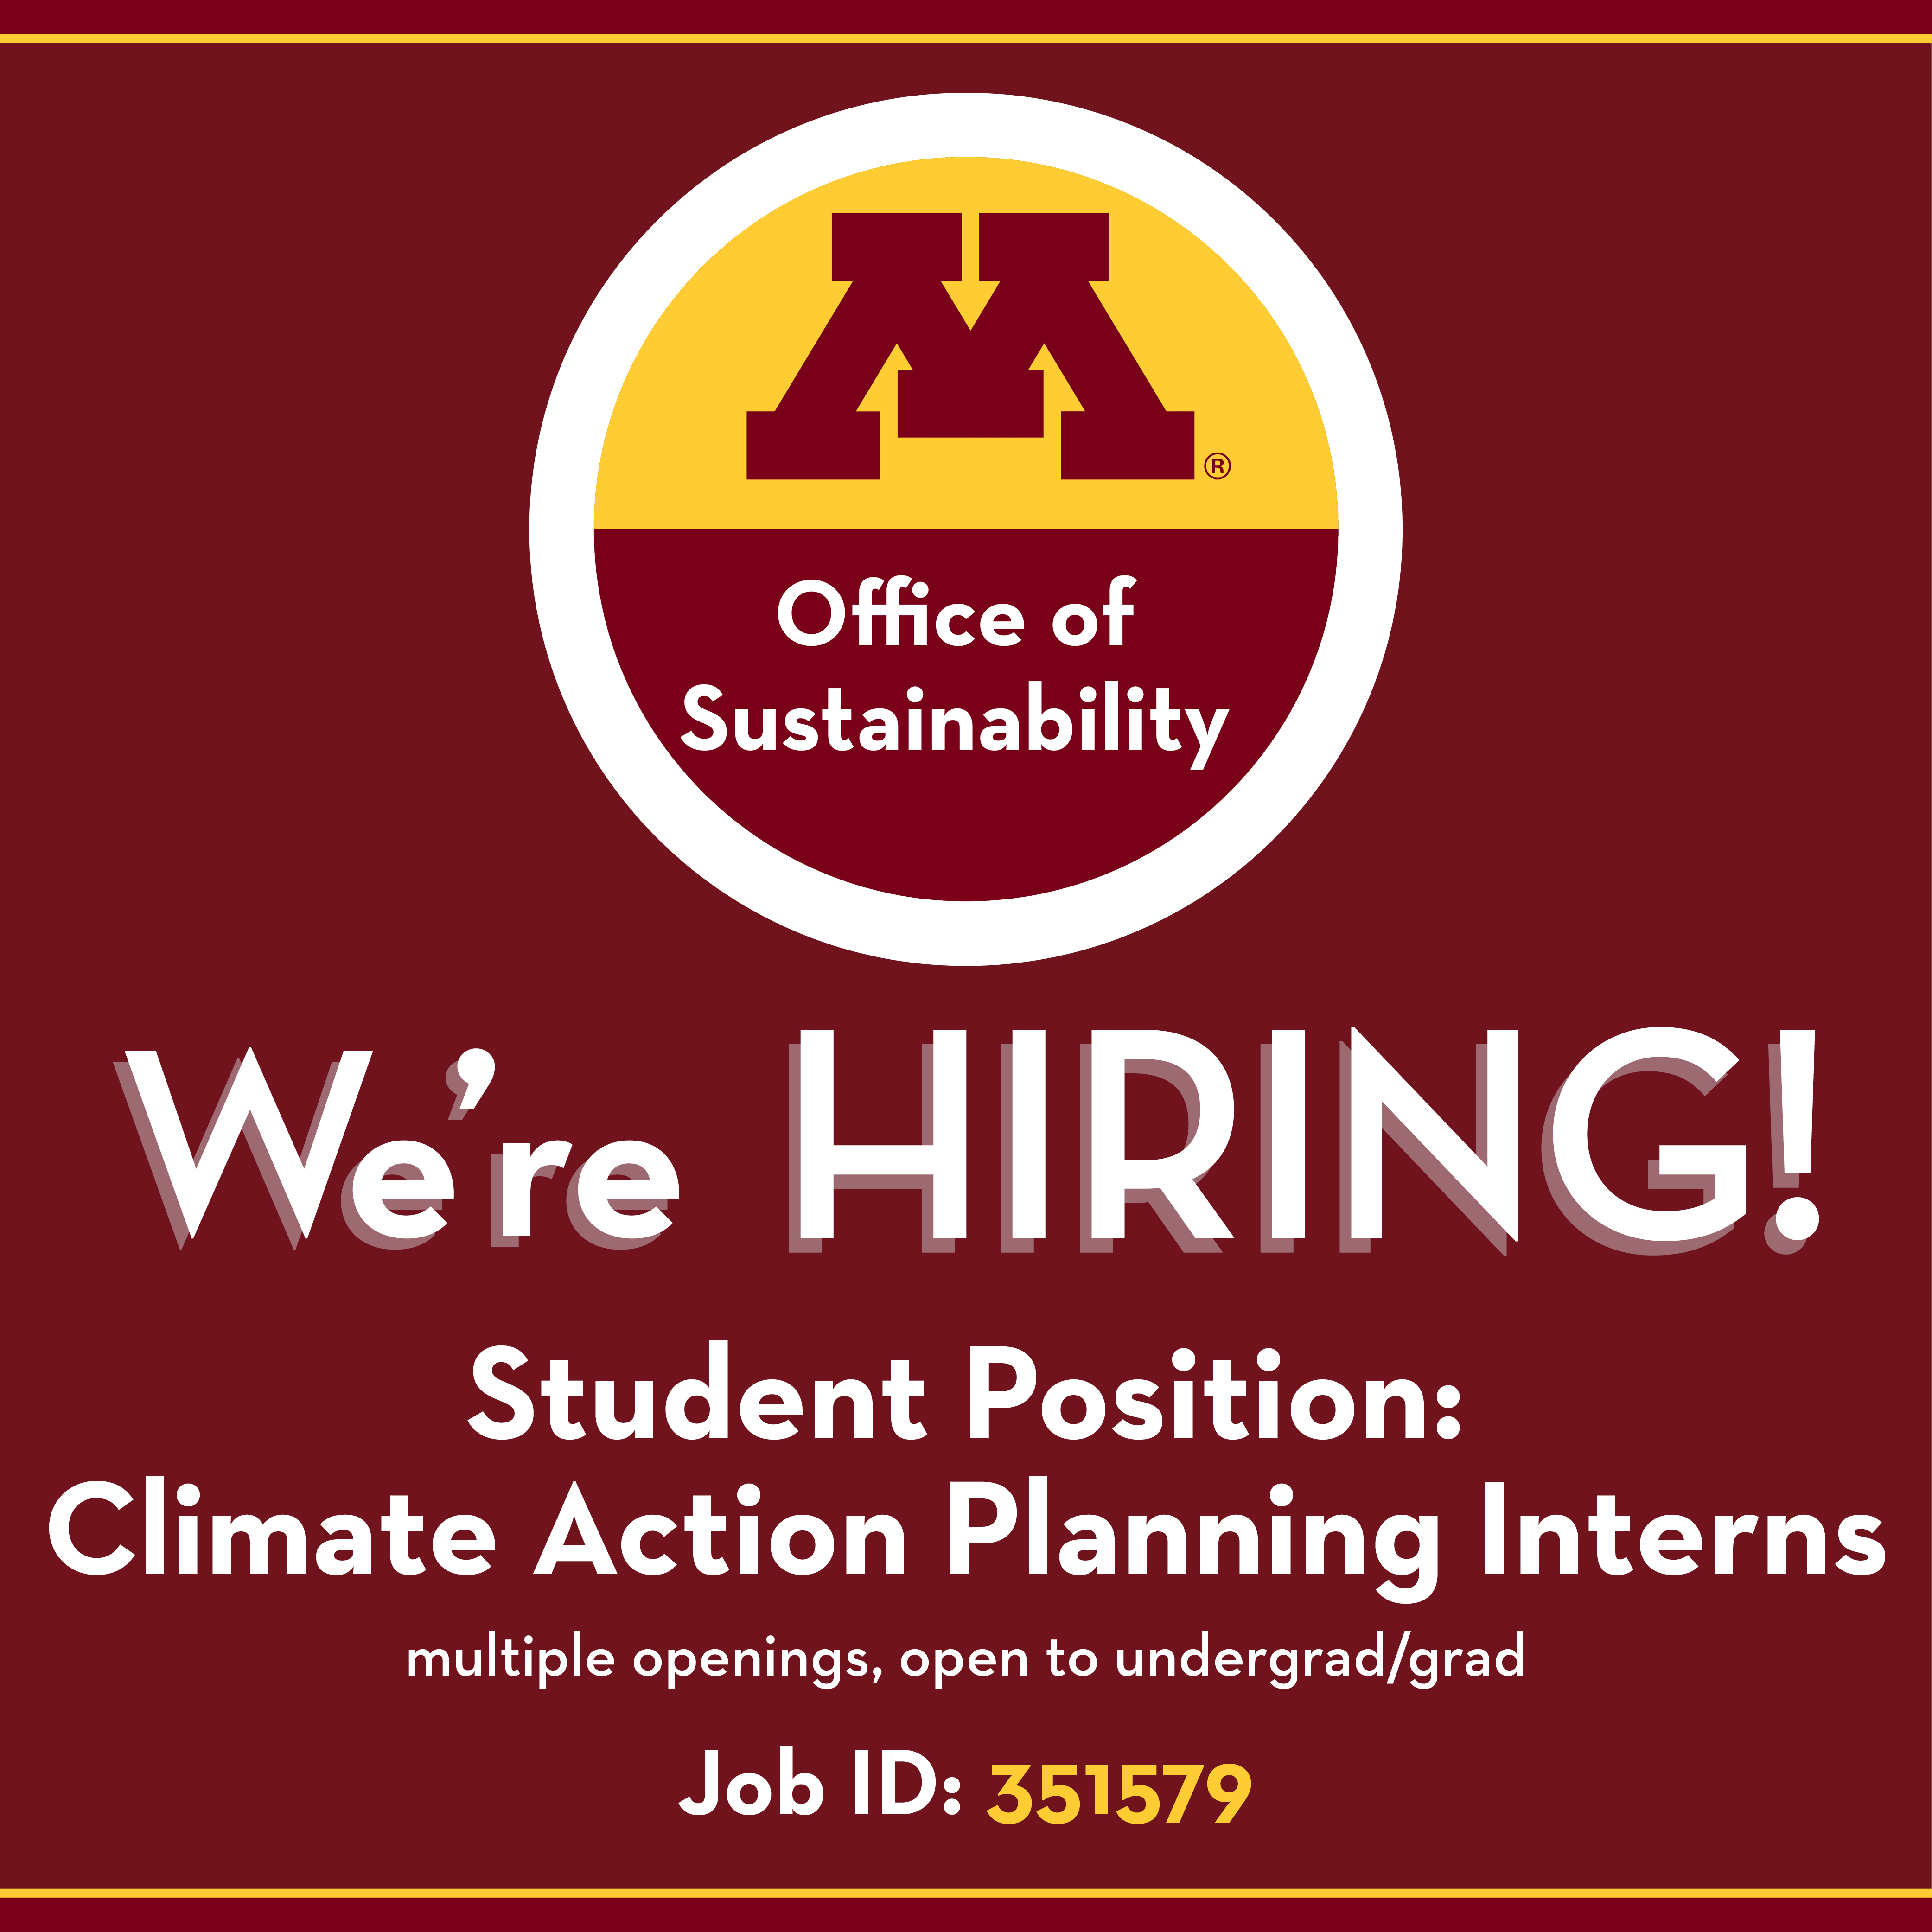 We're hiring Climate Action Planning interns Job ID 351579